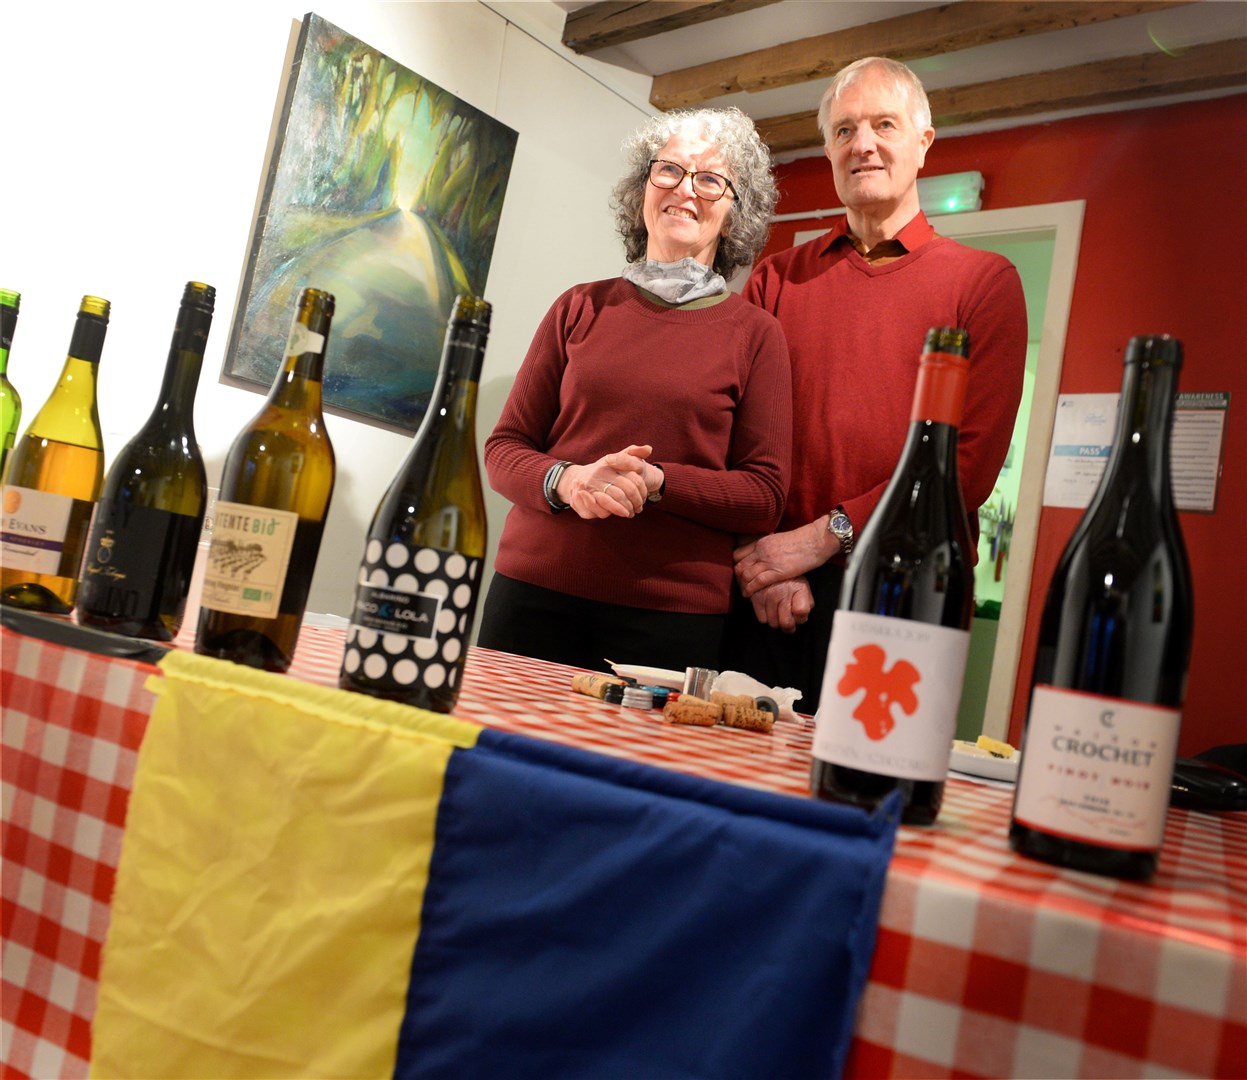 Ukraine cheese and wine tasting fundraiser at the Old Brewery Cromarty. Organisers Barbara and Richard Davis. Picture Gary Anthony.